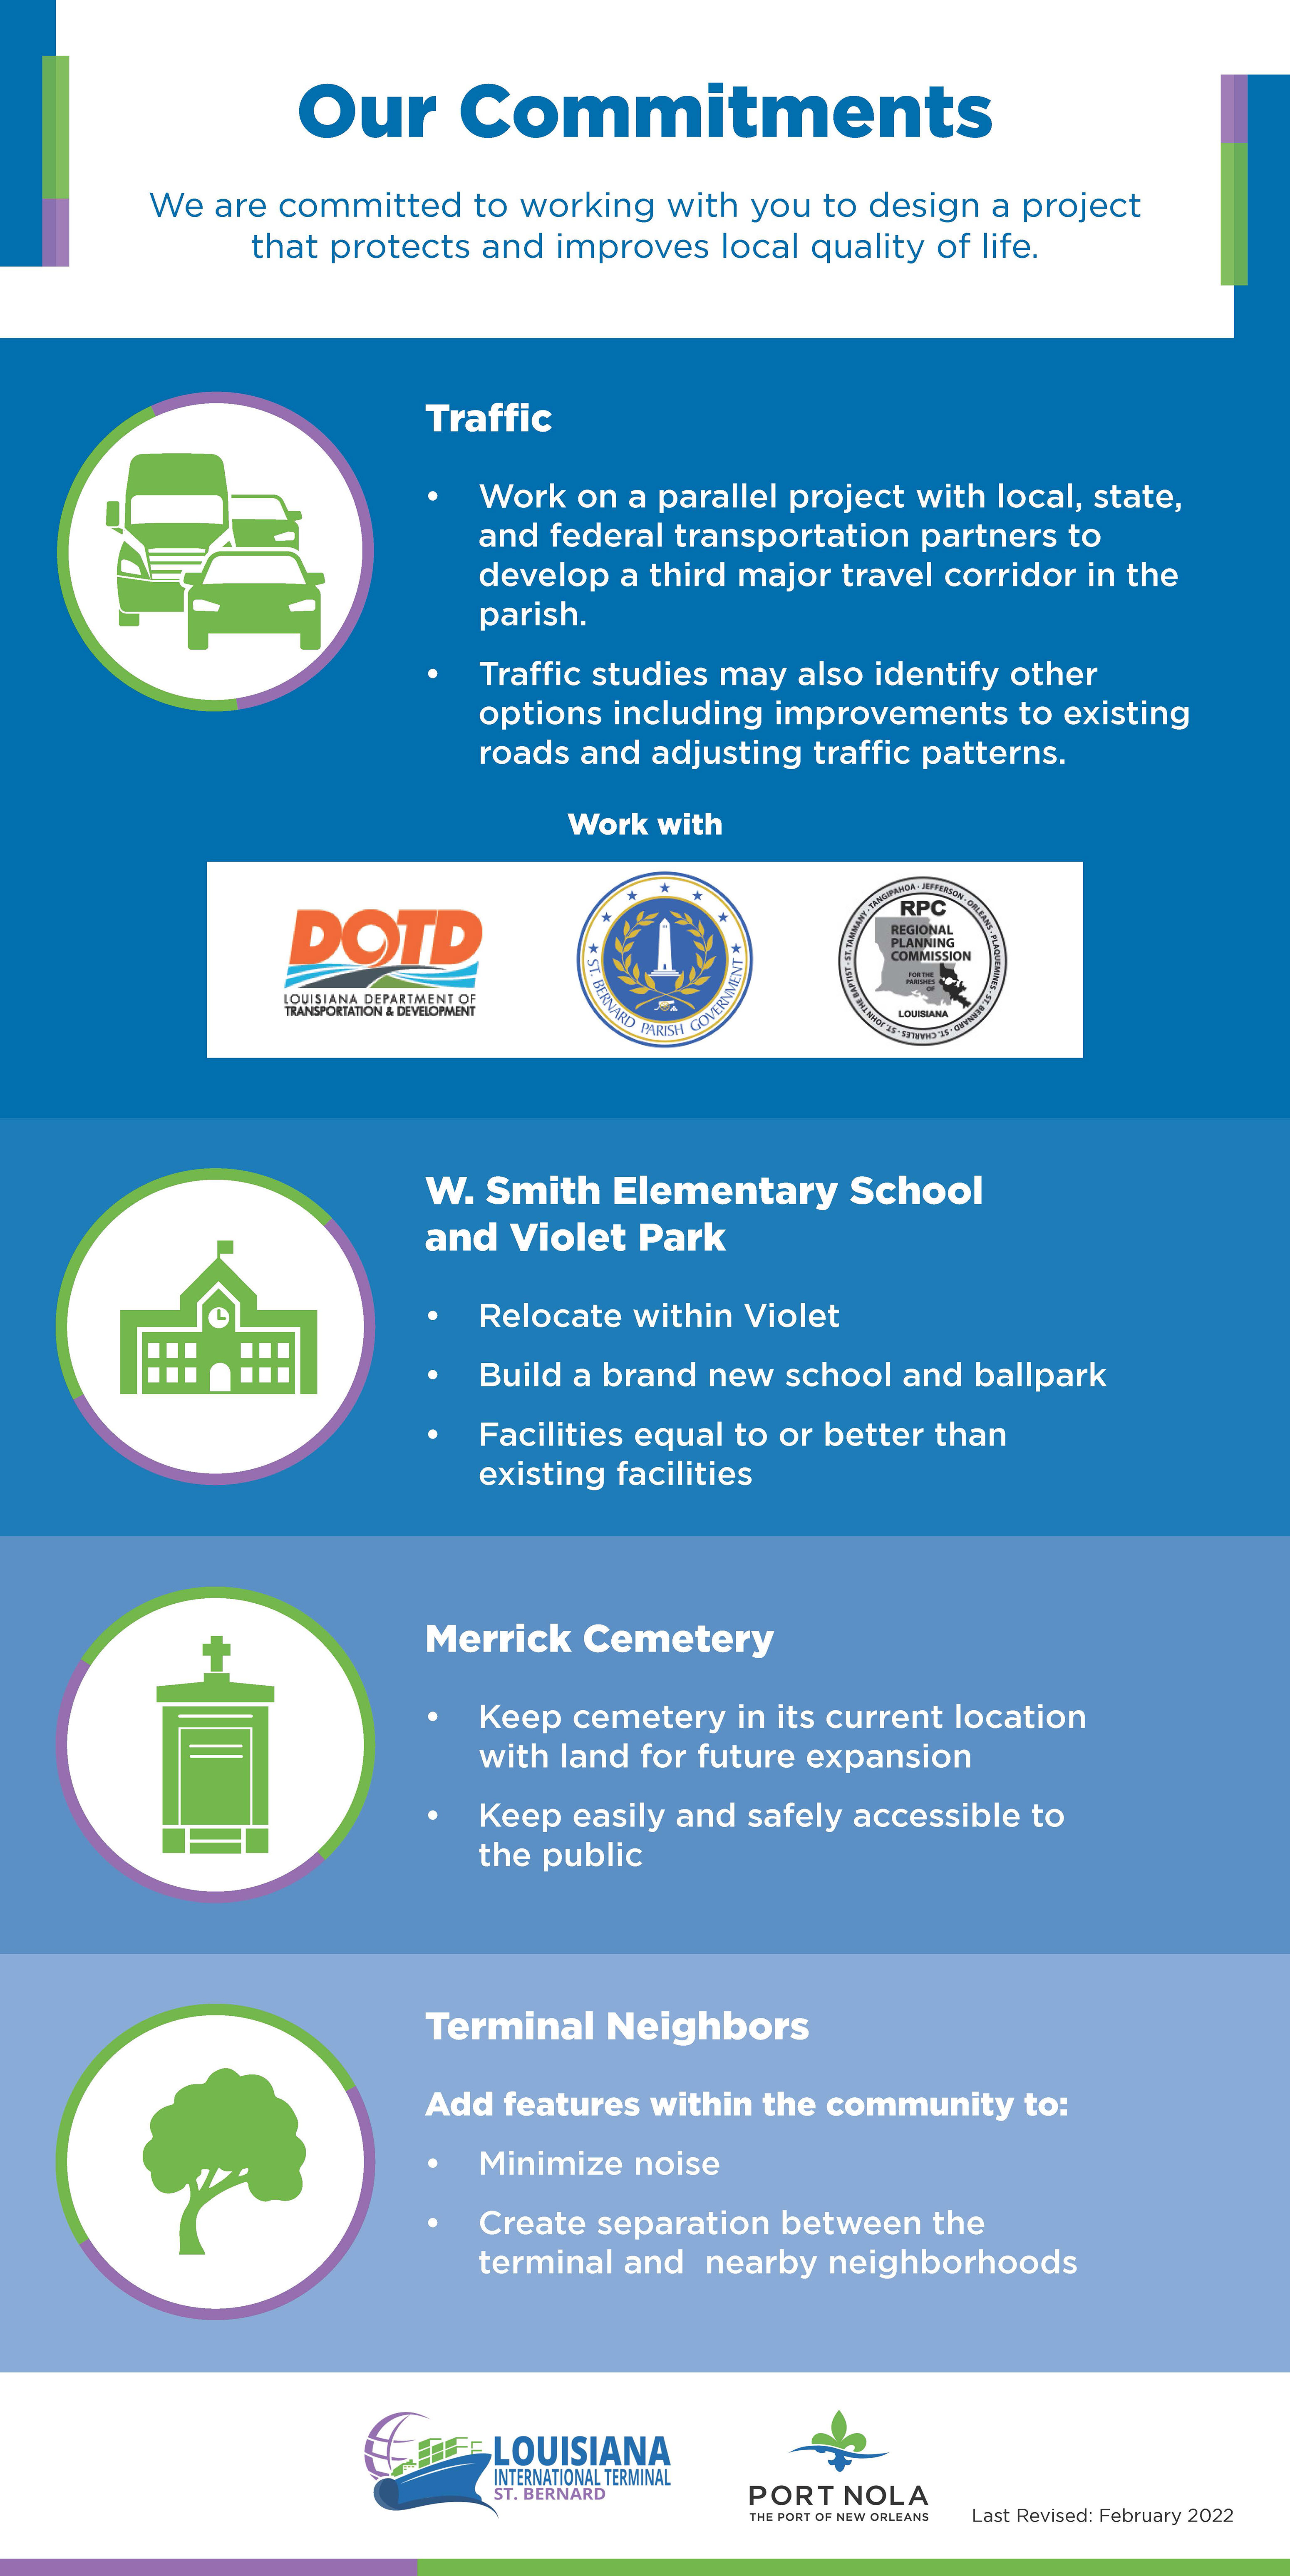 Graphic detailing the commitments Port NOLA is making to the community to maintain the quality of life, such as traffic studies, a third roadway, the school and ballpark relocation, Merrick Cemetery remaining where it is, and adding features to separate the community from the terminal.